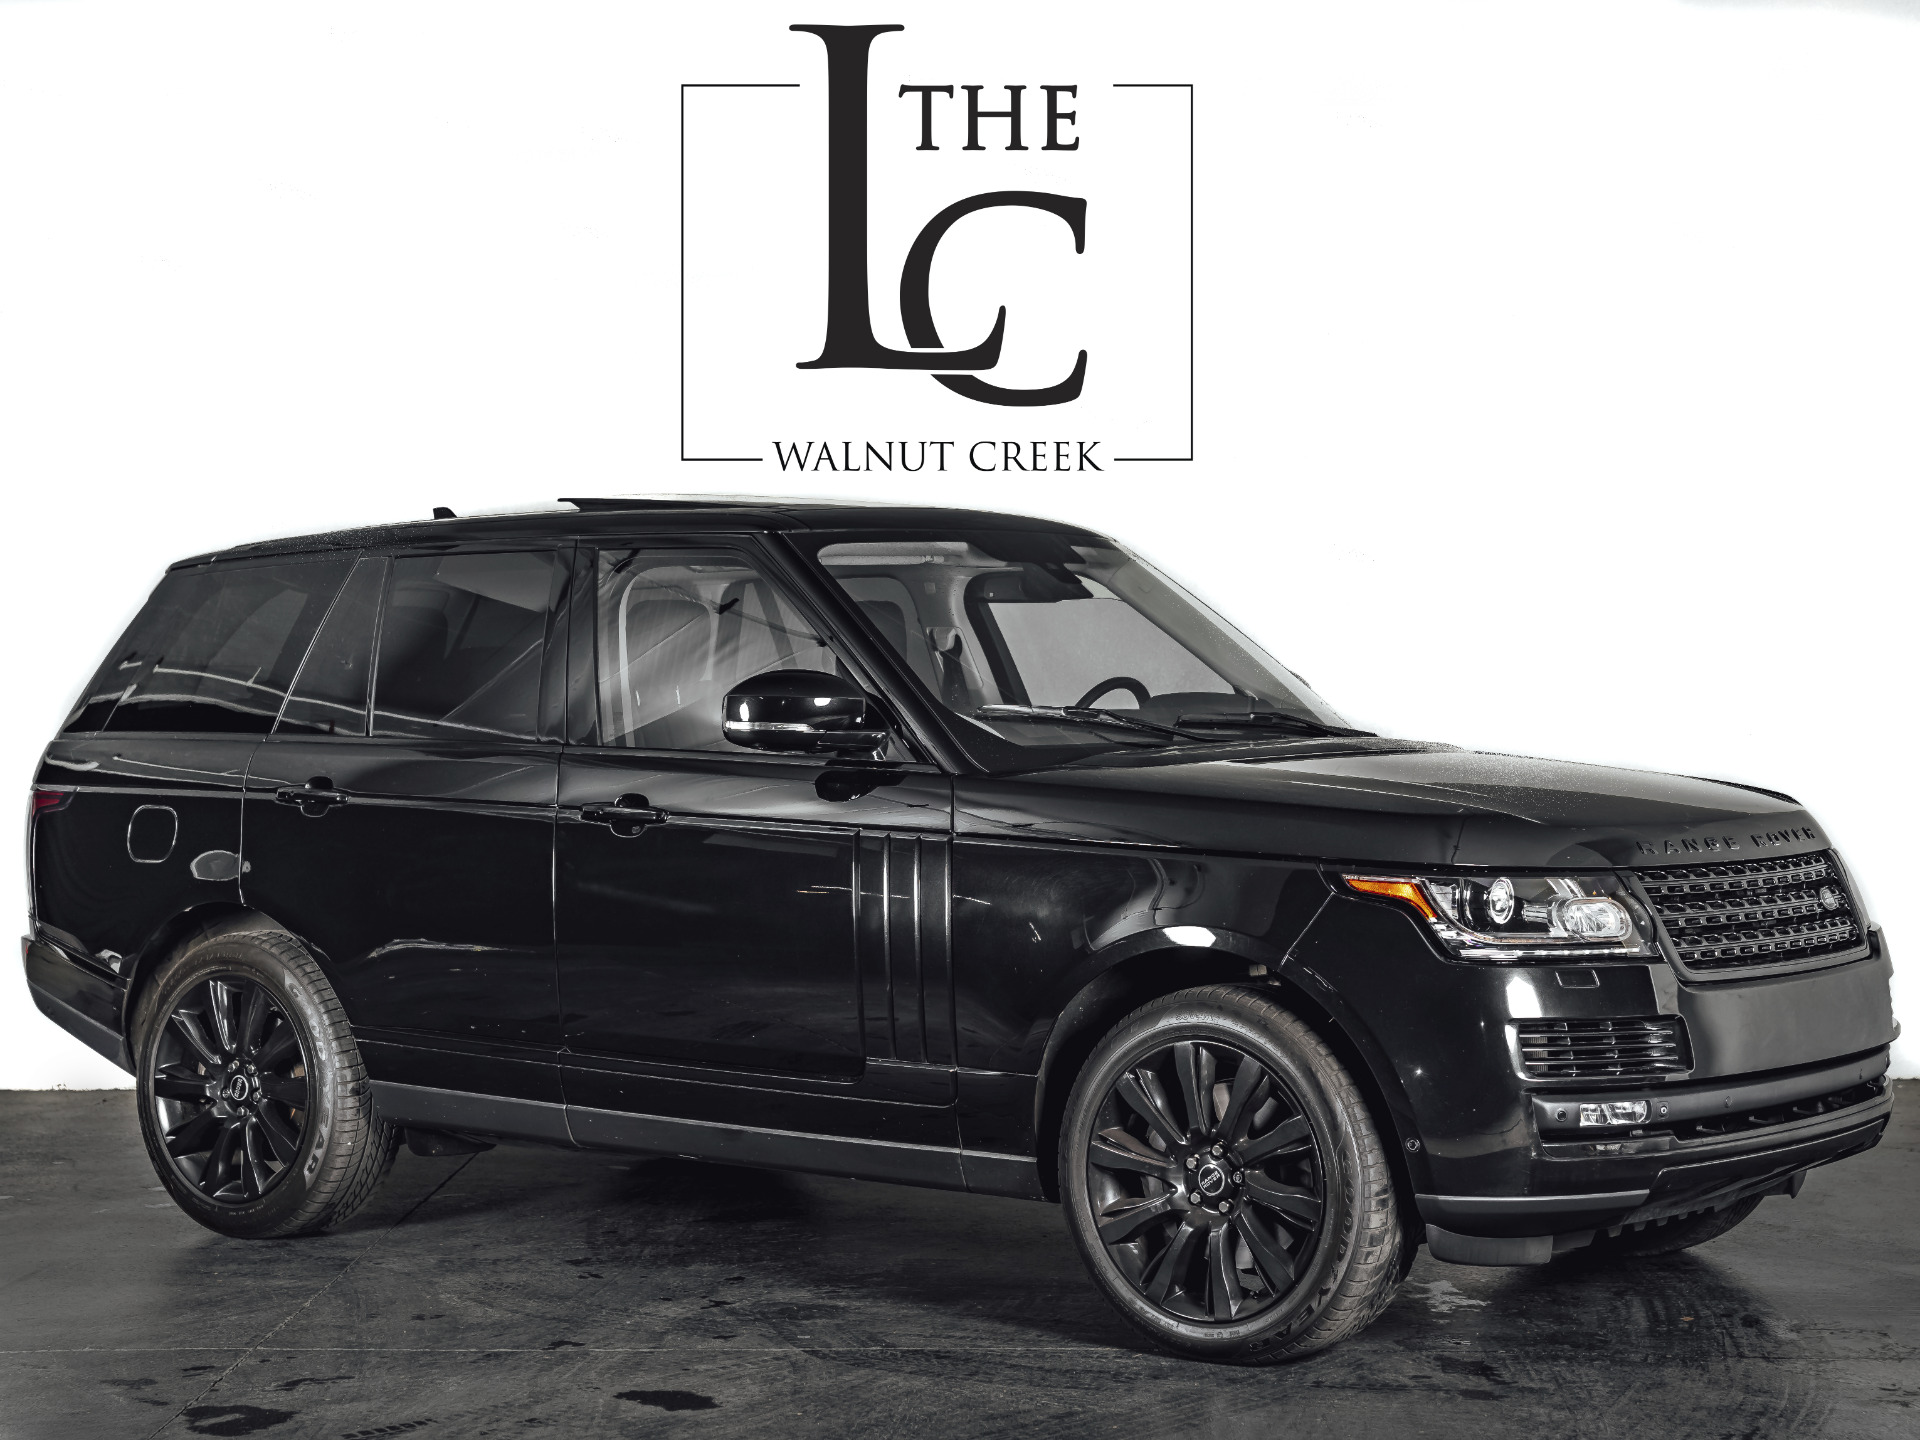 mot Ruilhandel Huidige Used 2015 Land Rover Range Rover 5.0L V8 Supercharged For Sale (Sold) | The  Luxury Collection Walnut Creek Stock #FWP1408